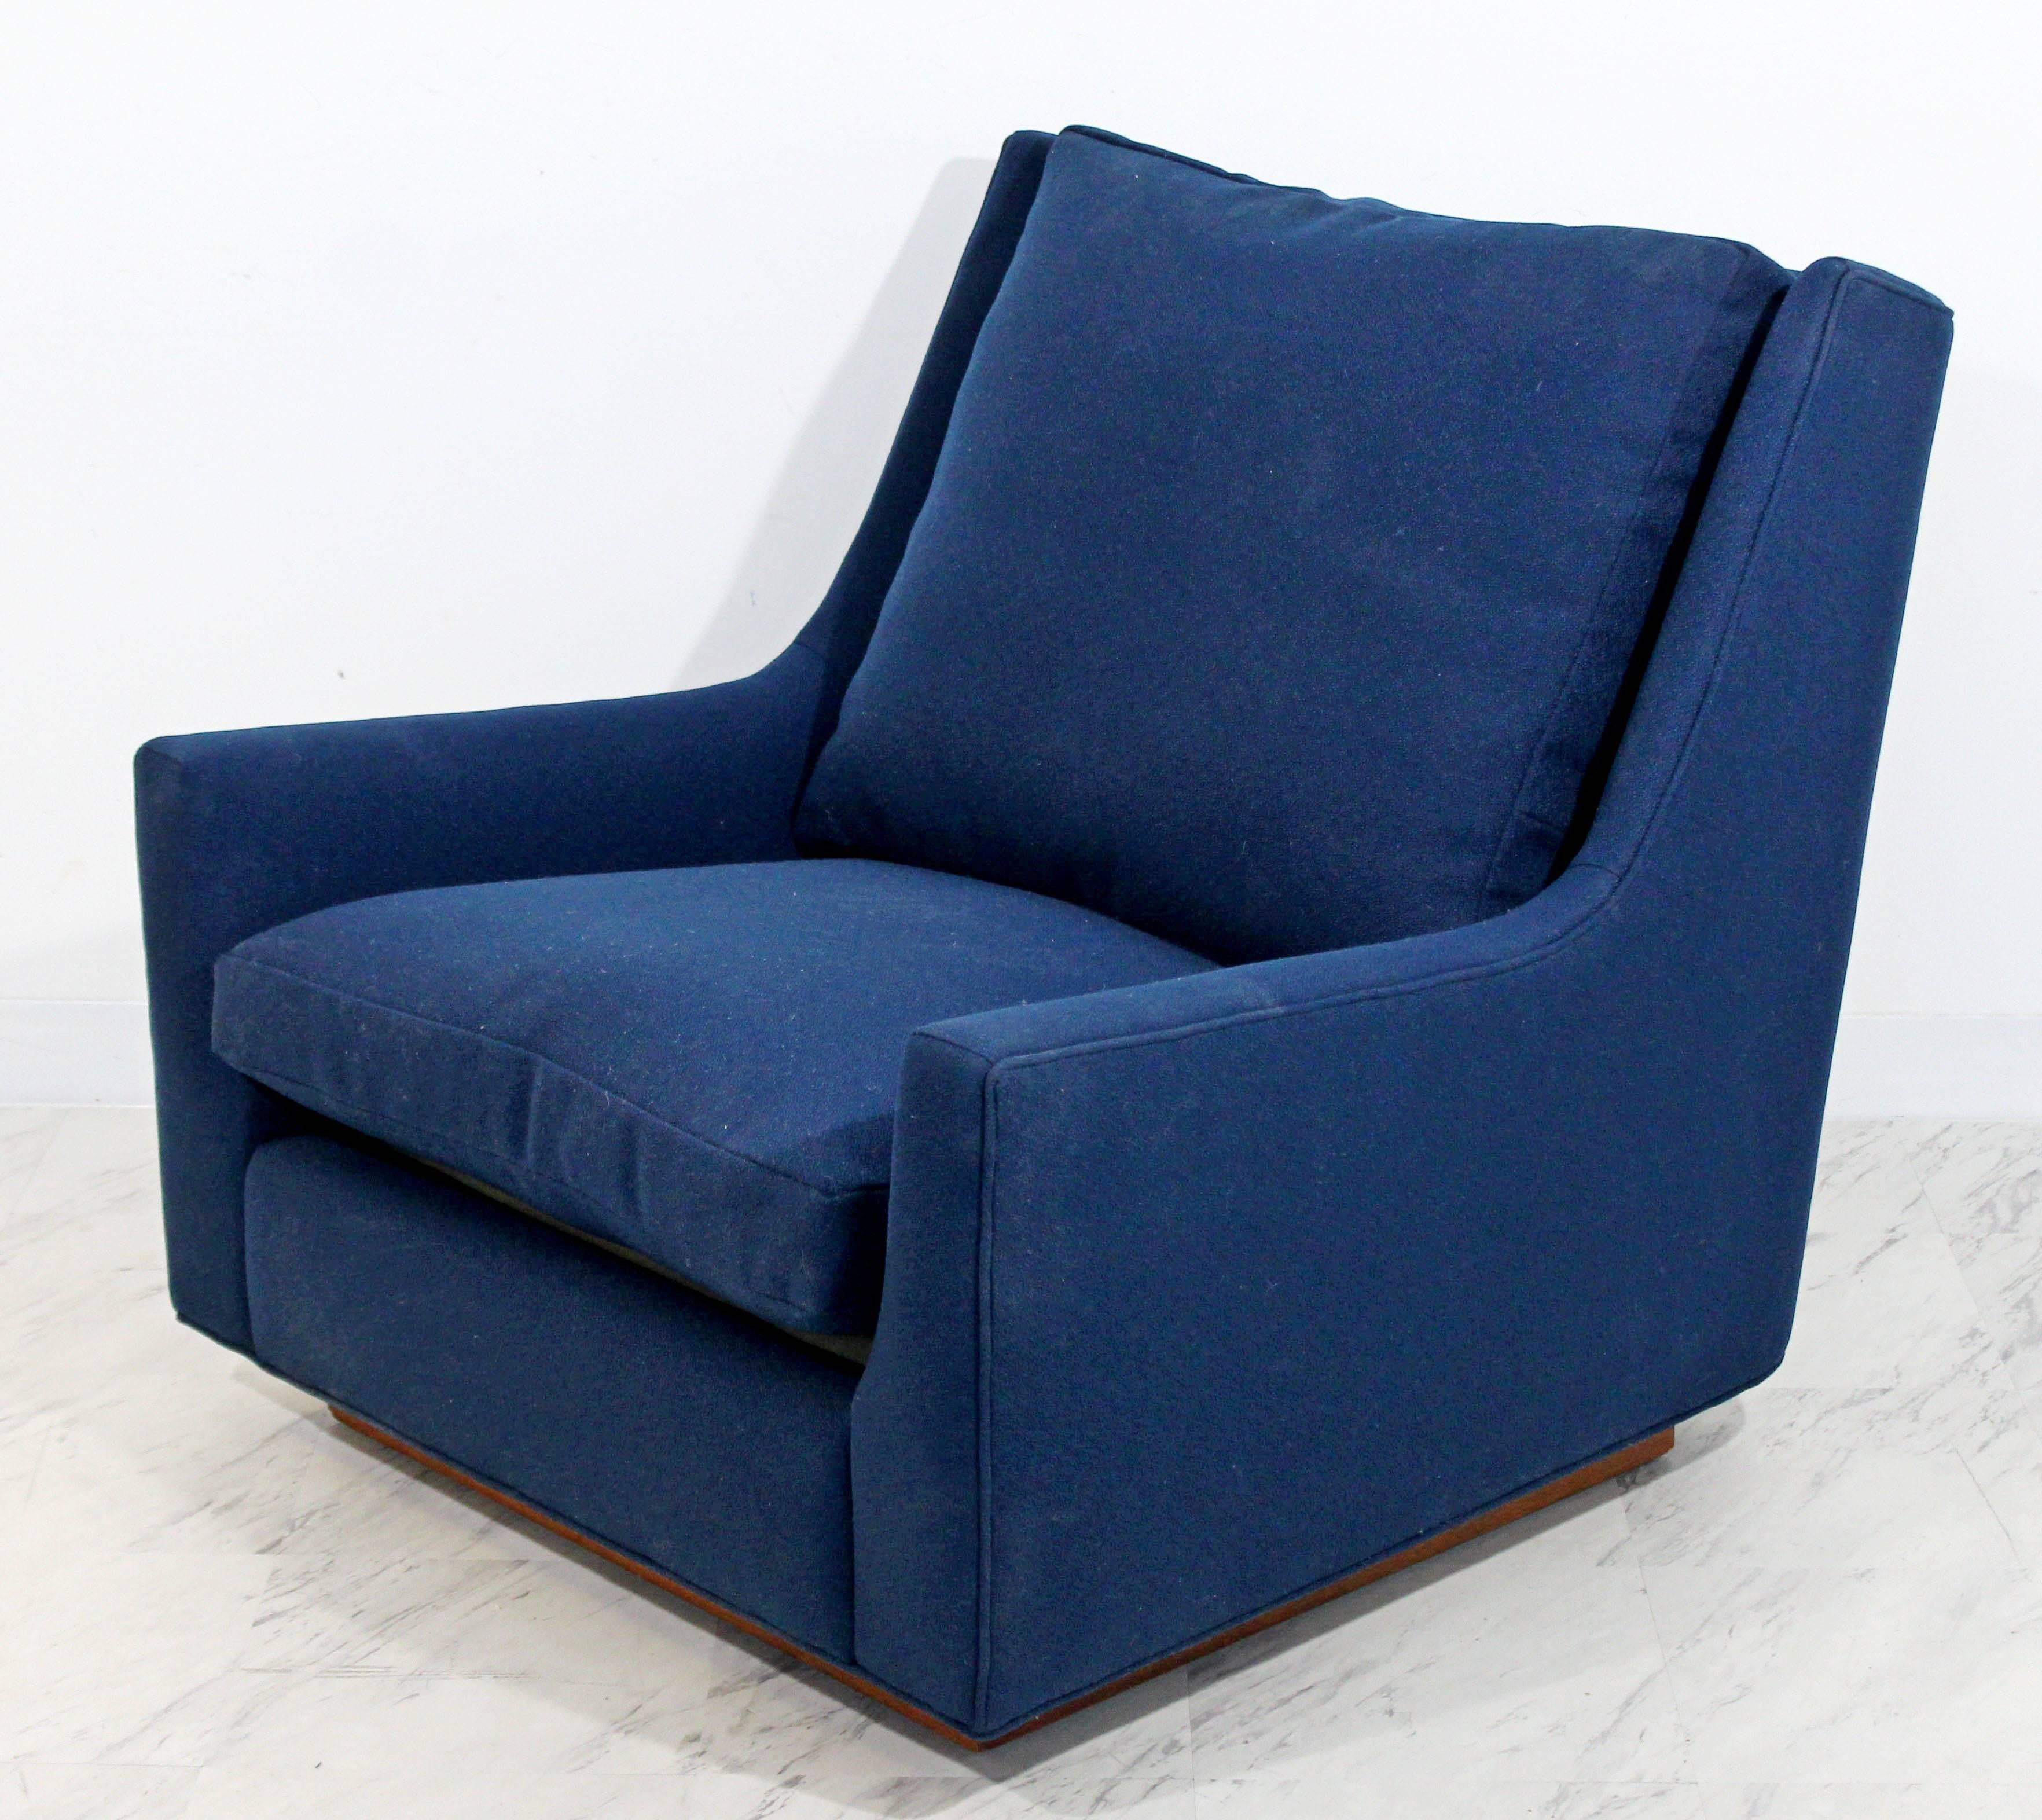 For your consideration is a rare cushy, wood plinth base, lounge chair that was designed by Milo Baughman, circa the 1970s. Just back from being professionally reupholstered in a beautiful blue boucle. Has original Thayer Coggin Milo Baughman tag.